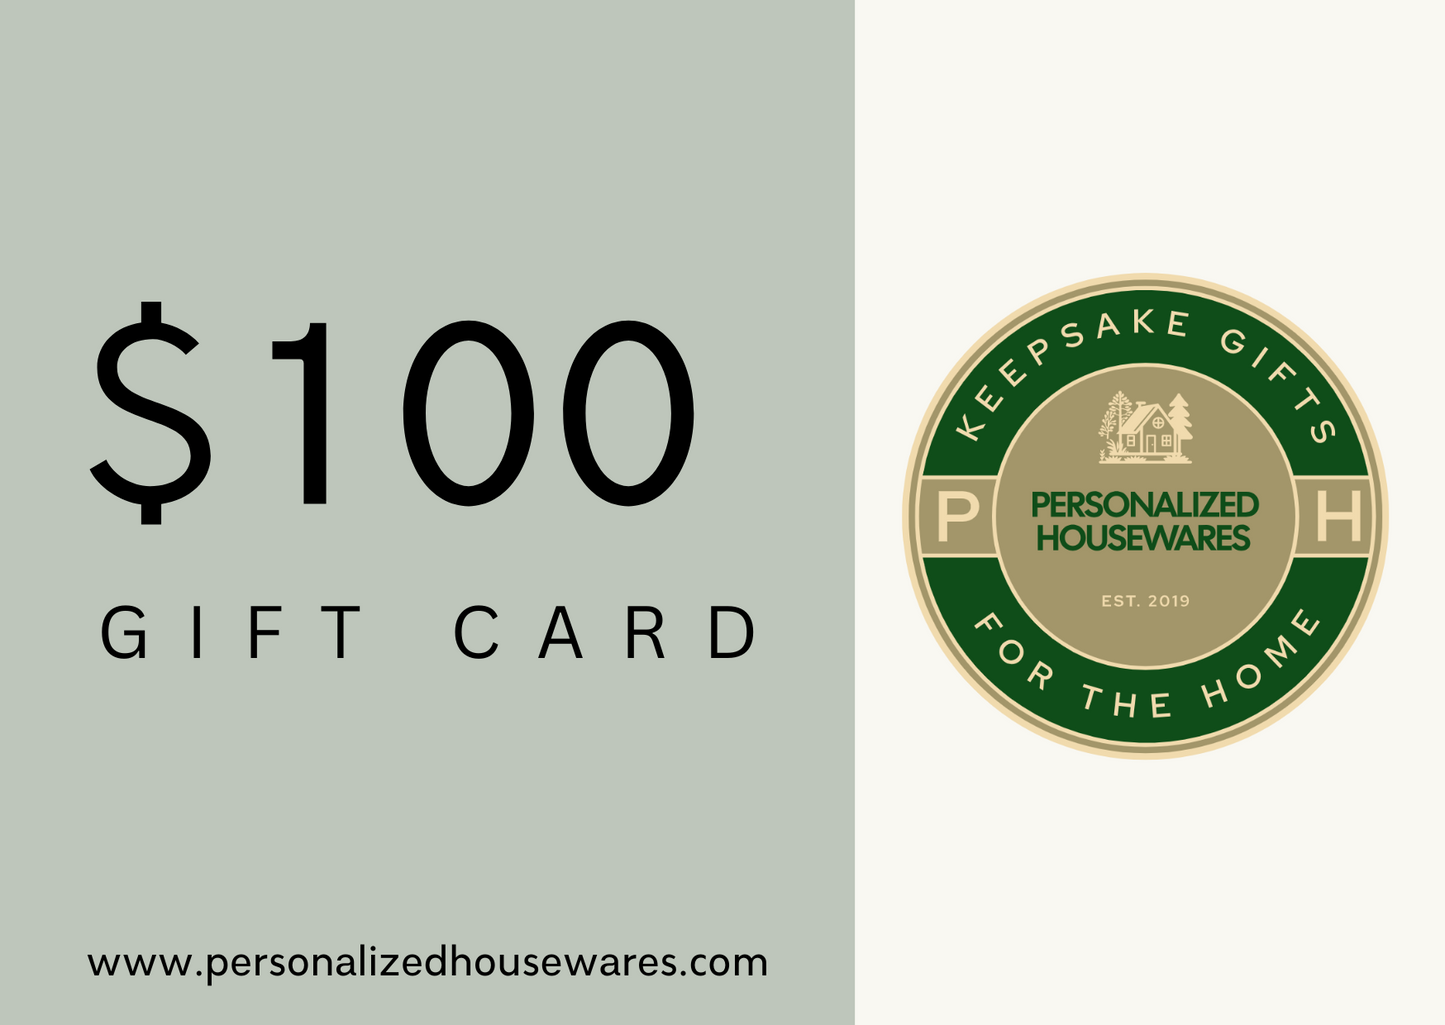 Personalized Housewares Gift Card $25 - $100